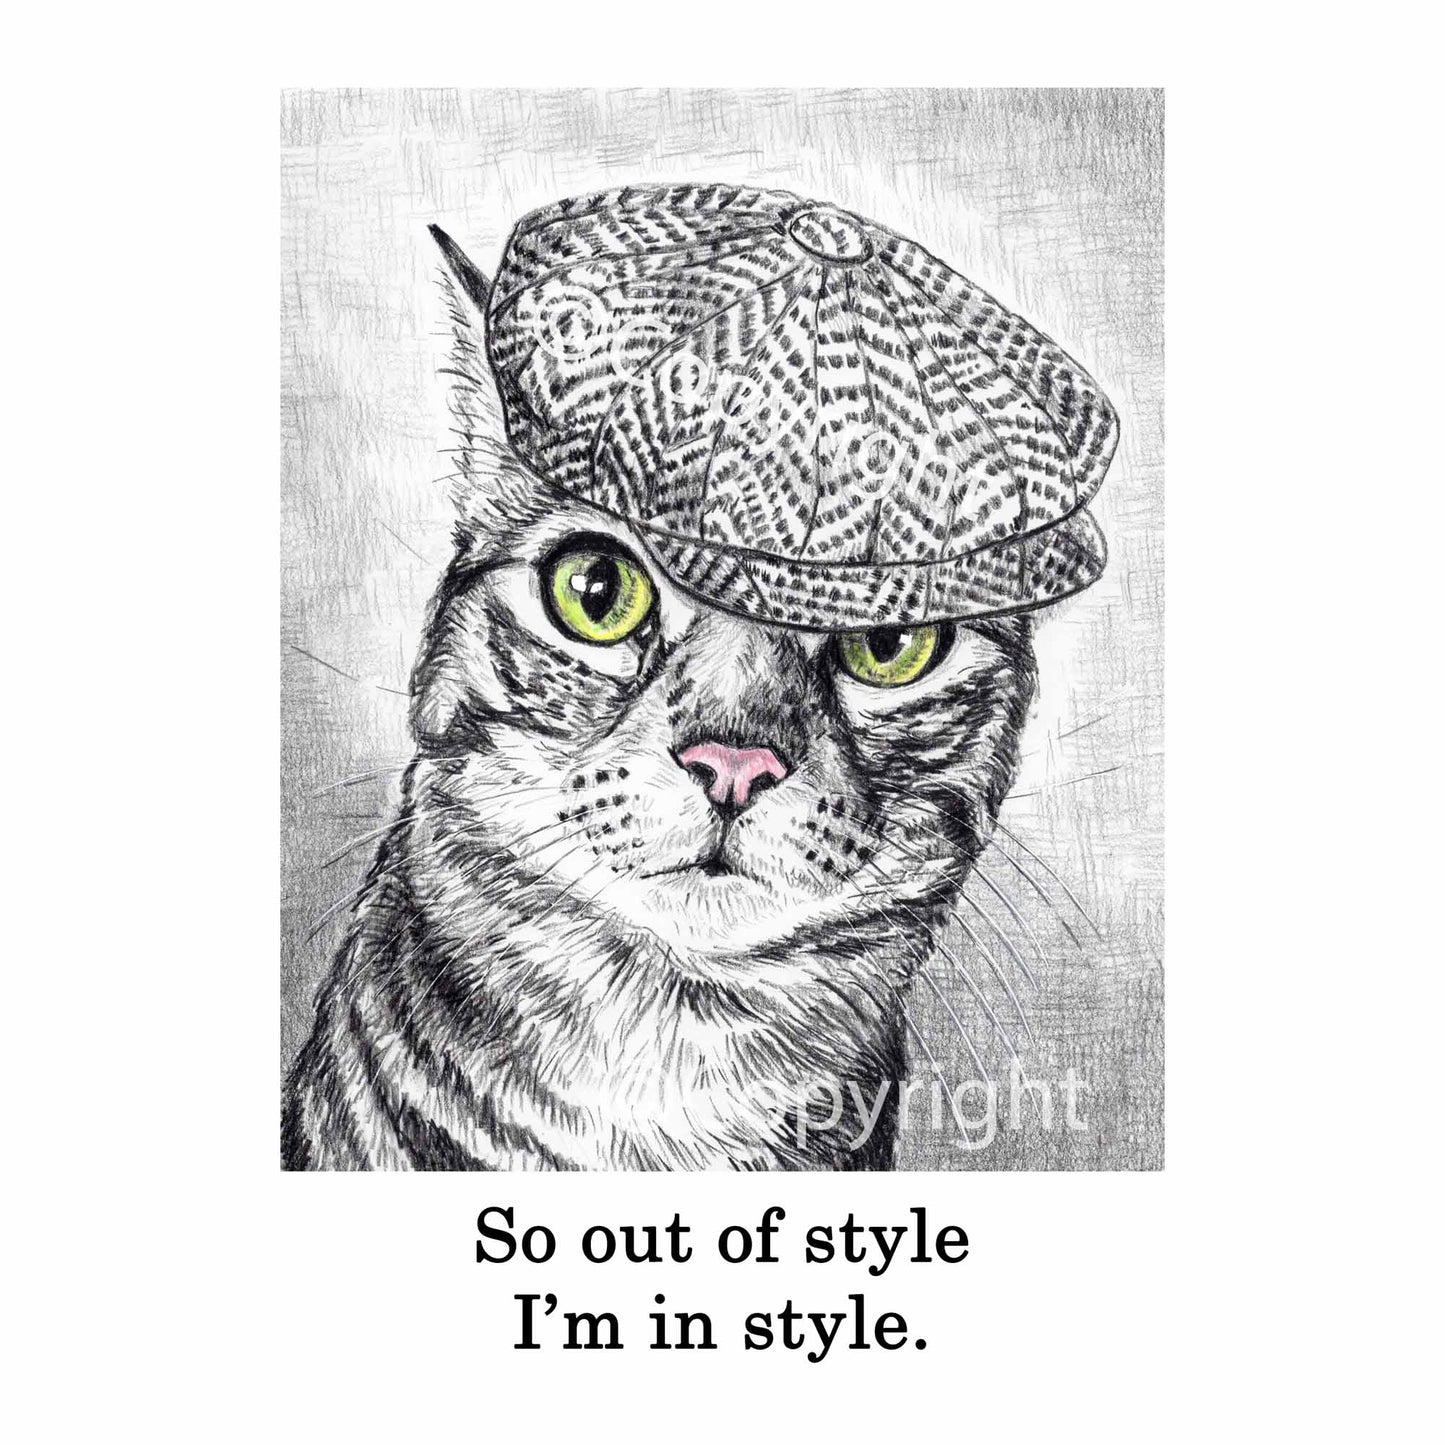 Vintage-inspired crayon drawing of a tabby cat wearing a newsboy cap by Deidre Wicks